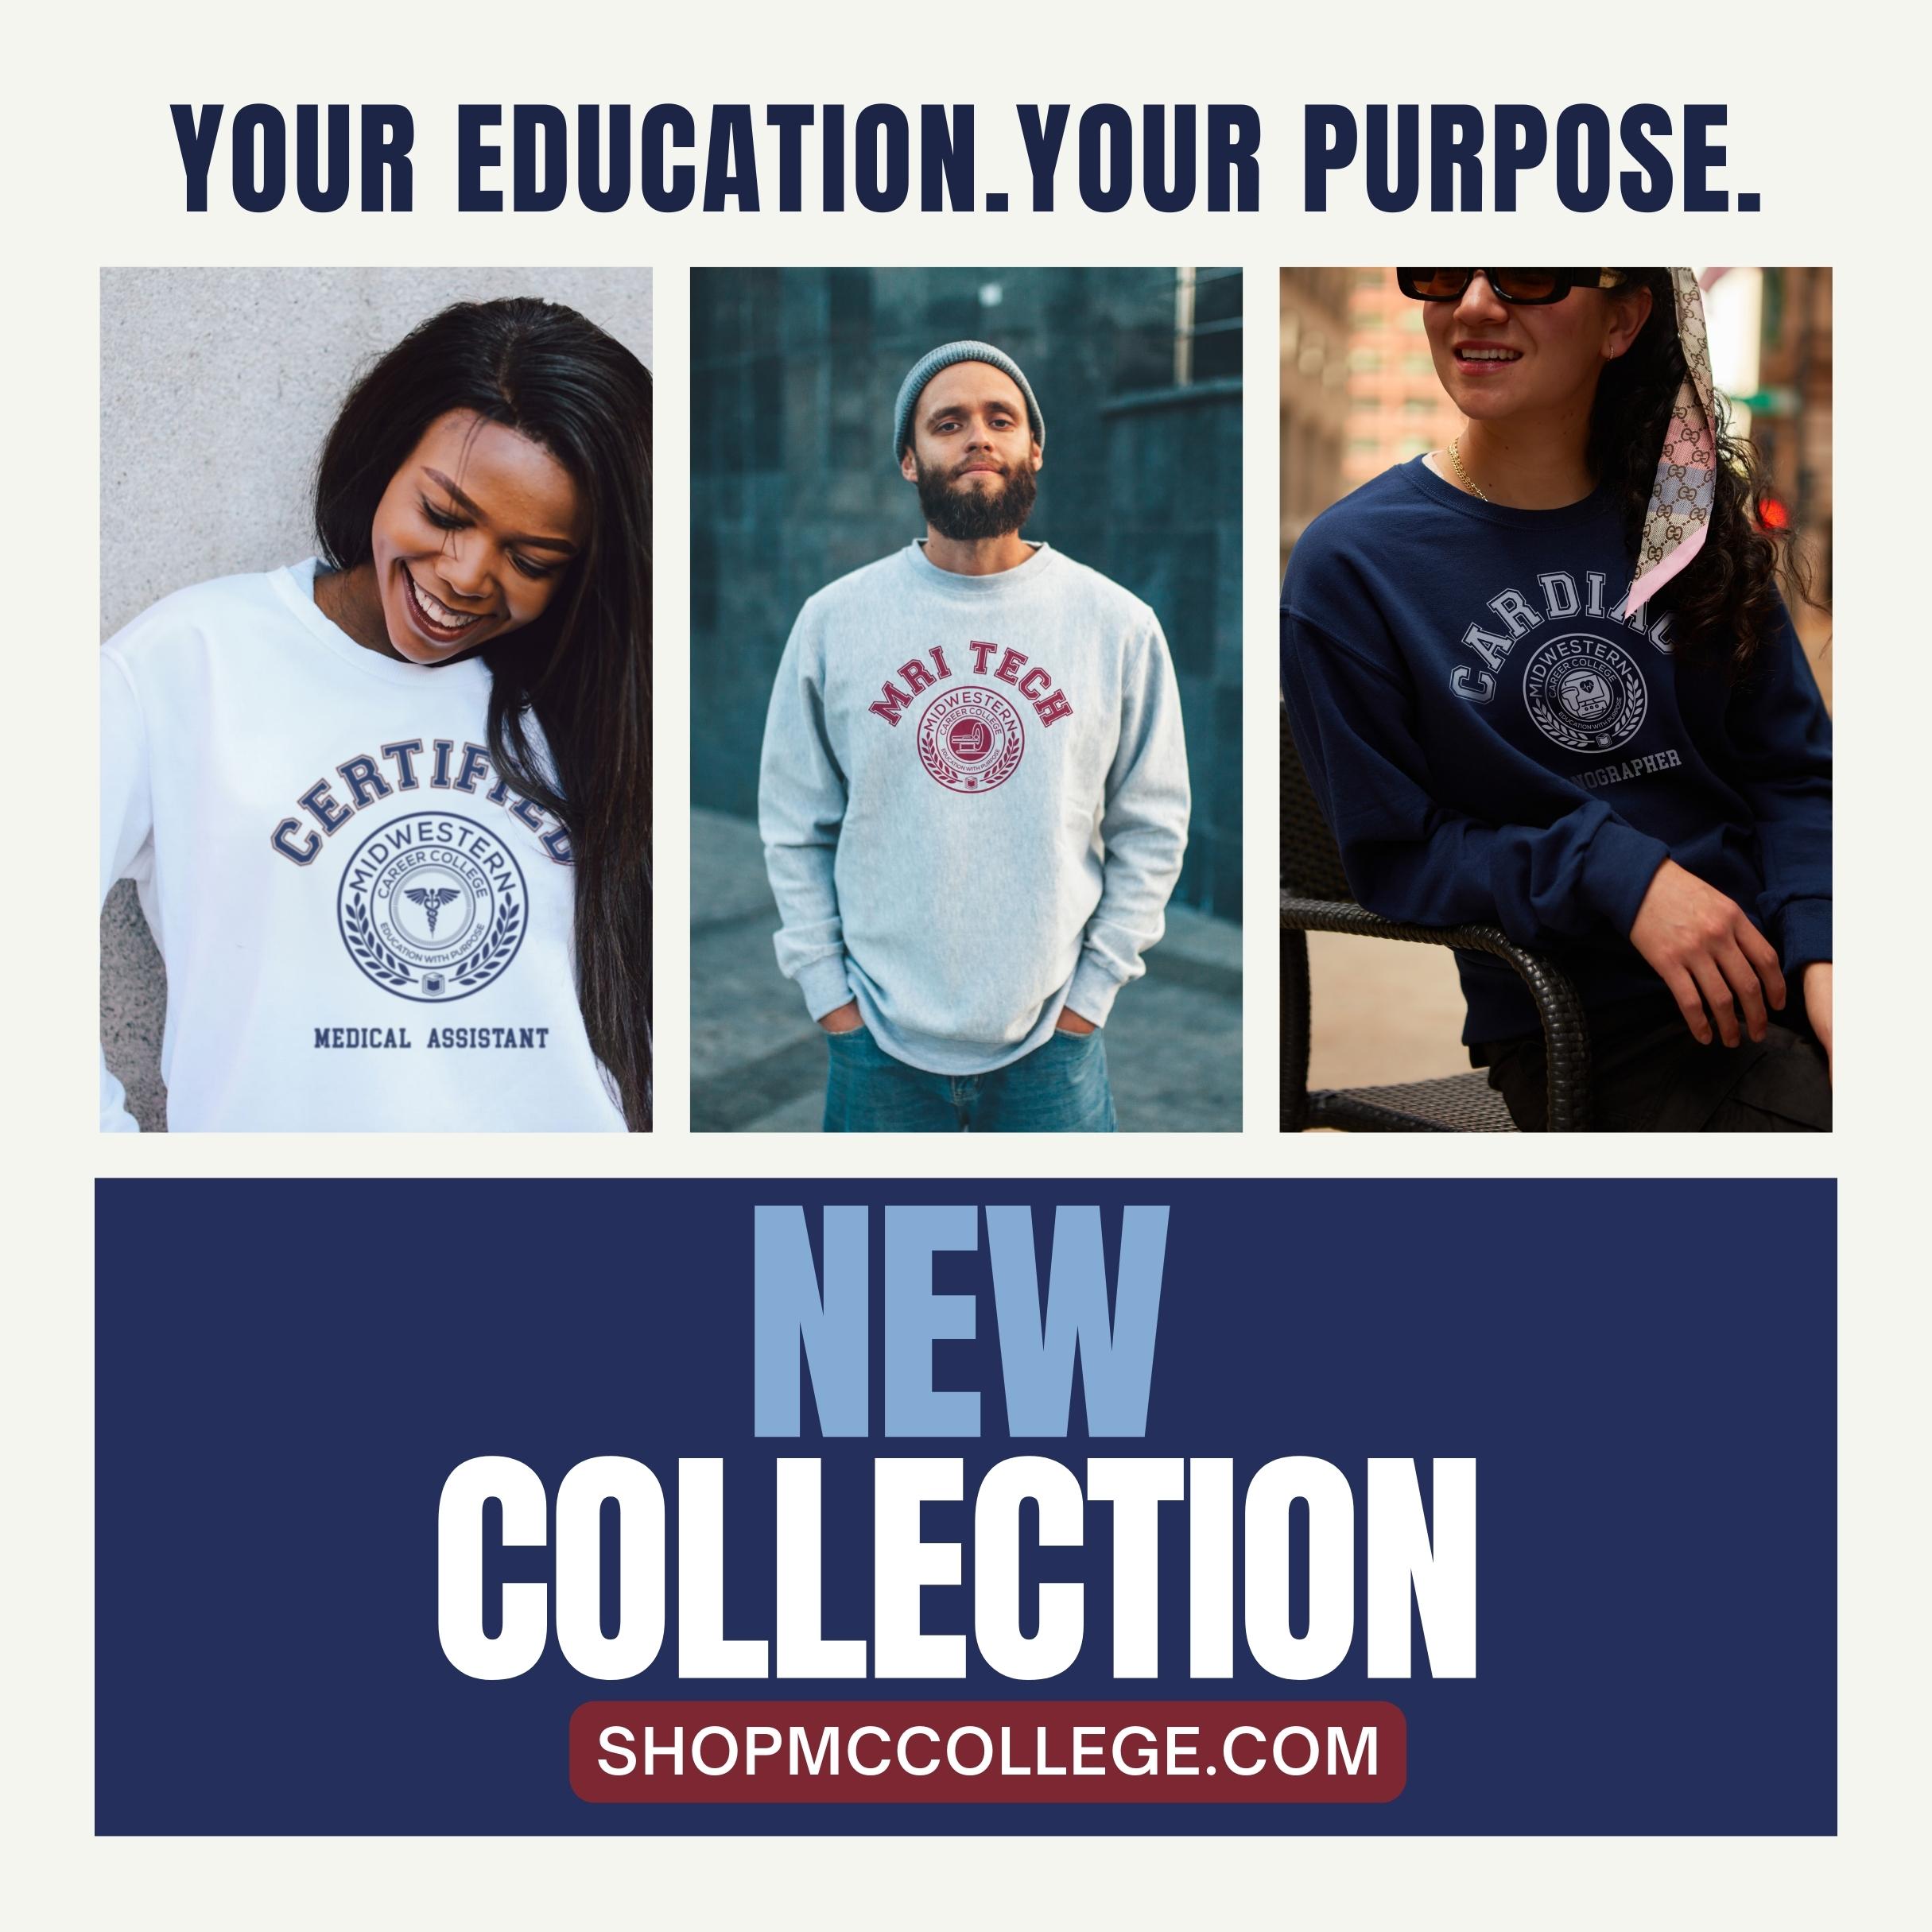 Your education. Your Purpose. New Collection for MCC campus shop